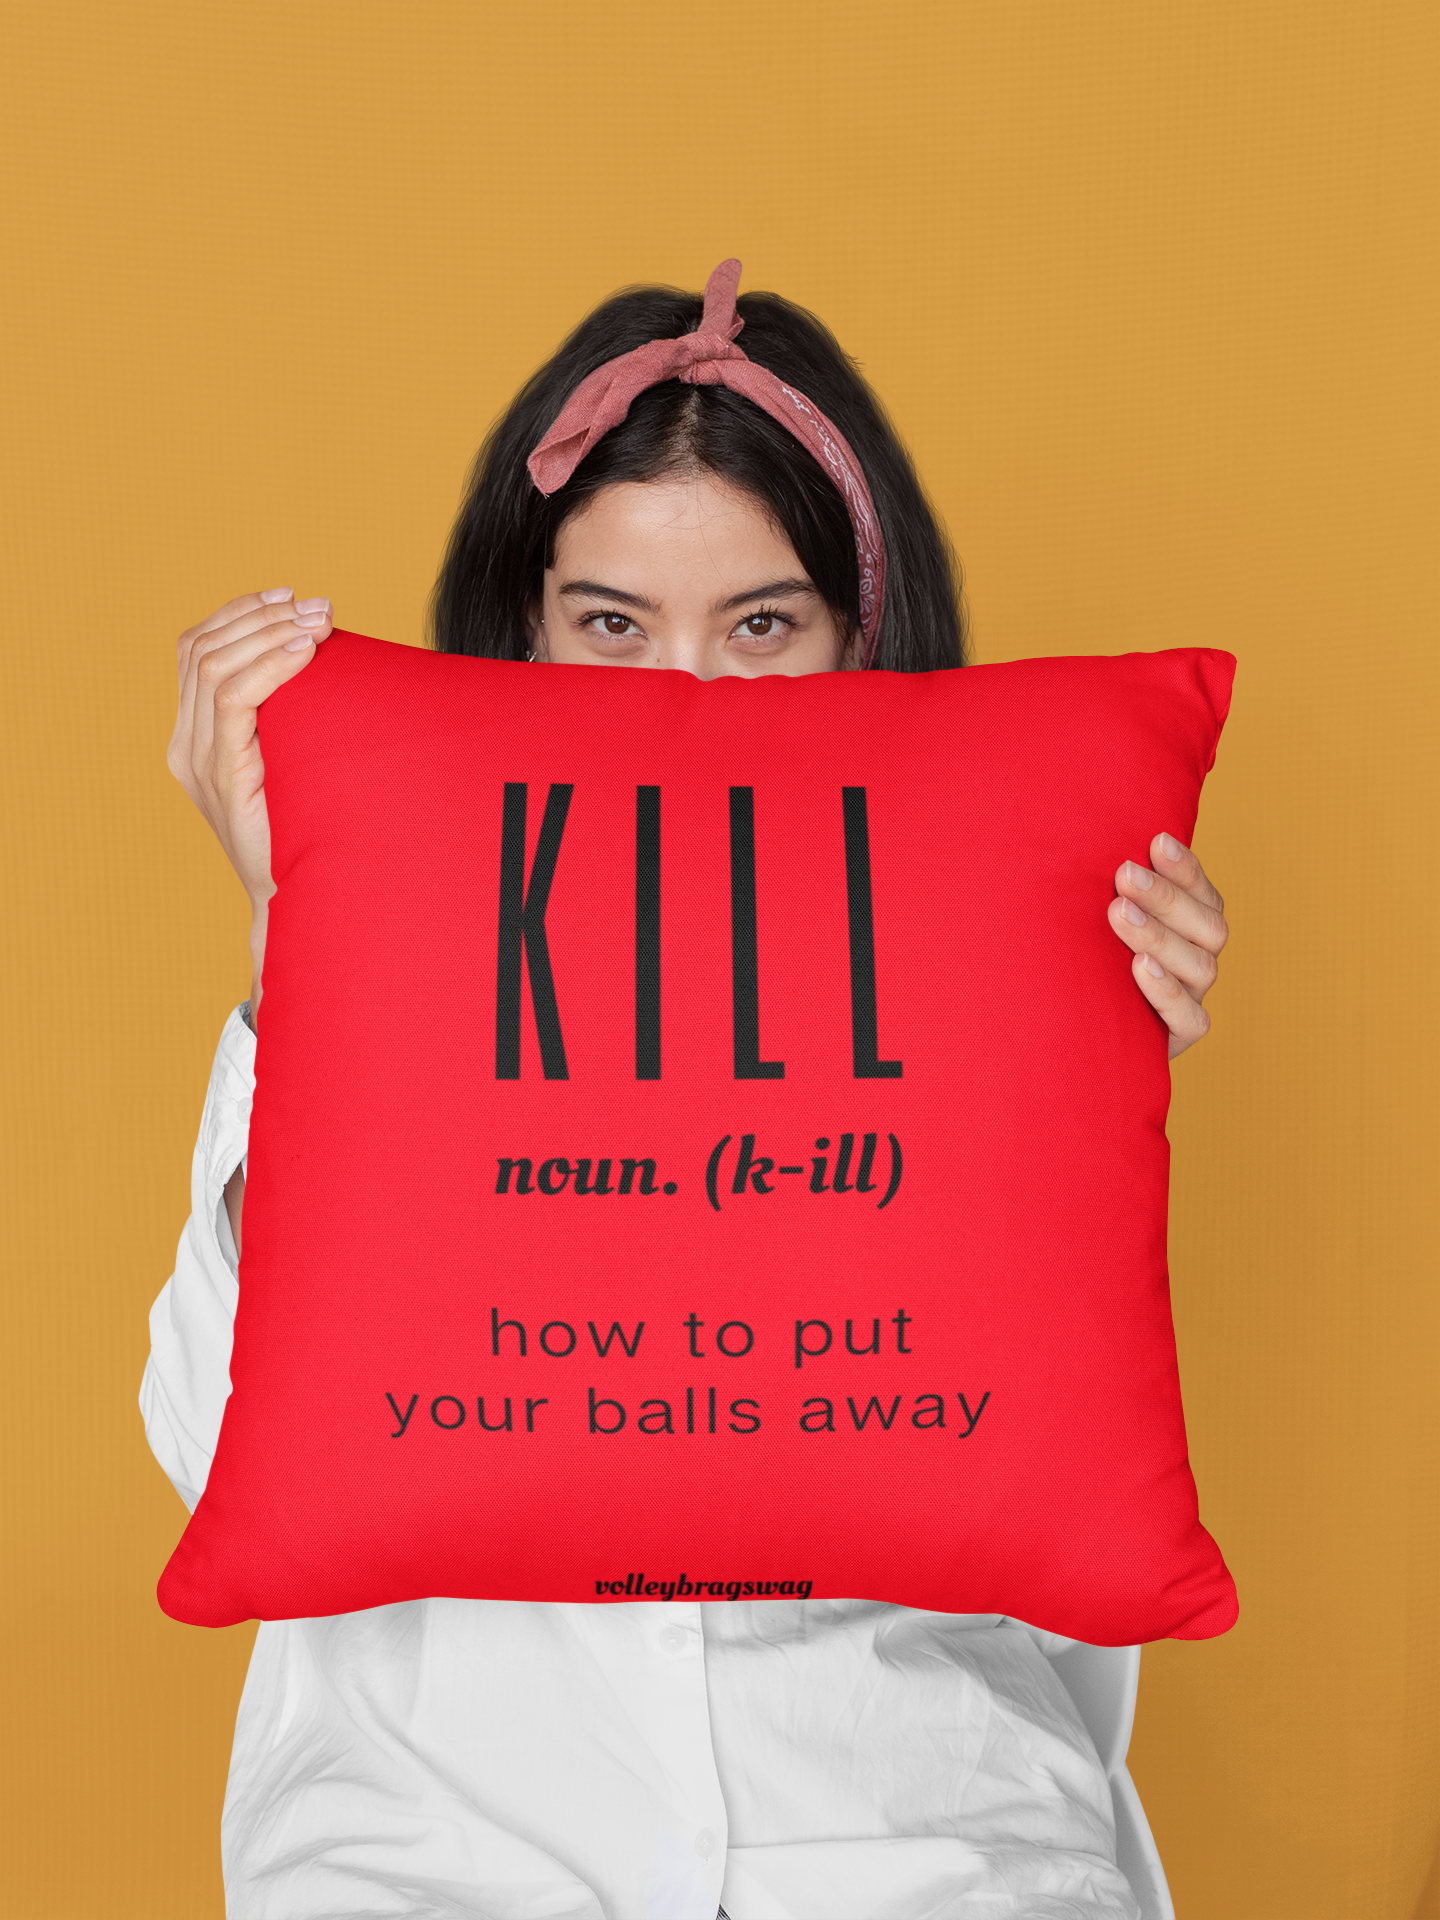 KILL - How To Put Your Balls Away. A kill is one of the volleyball slang terms that explains how a hitter puts a ball away on the court to score a point.